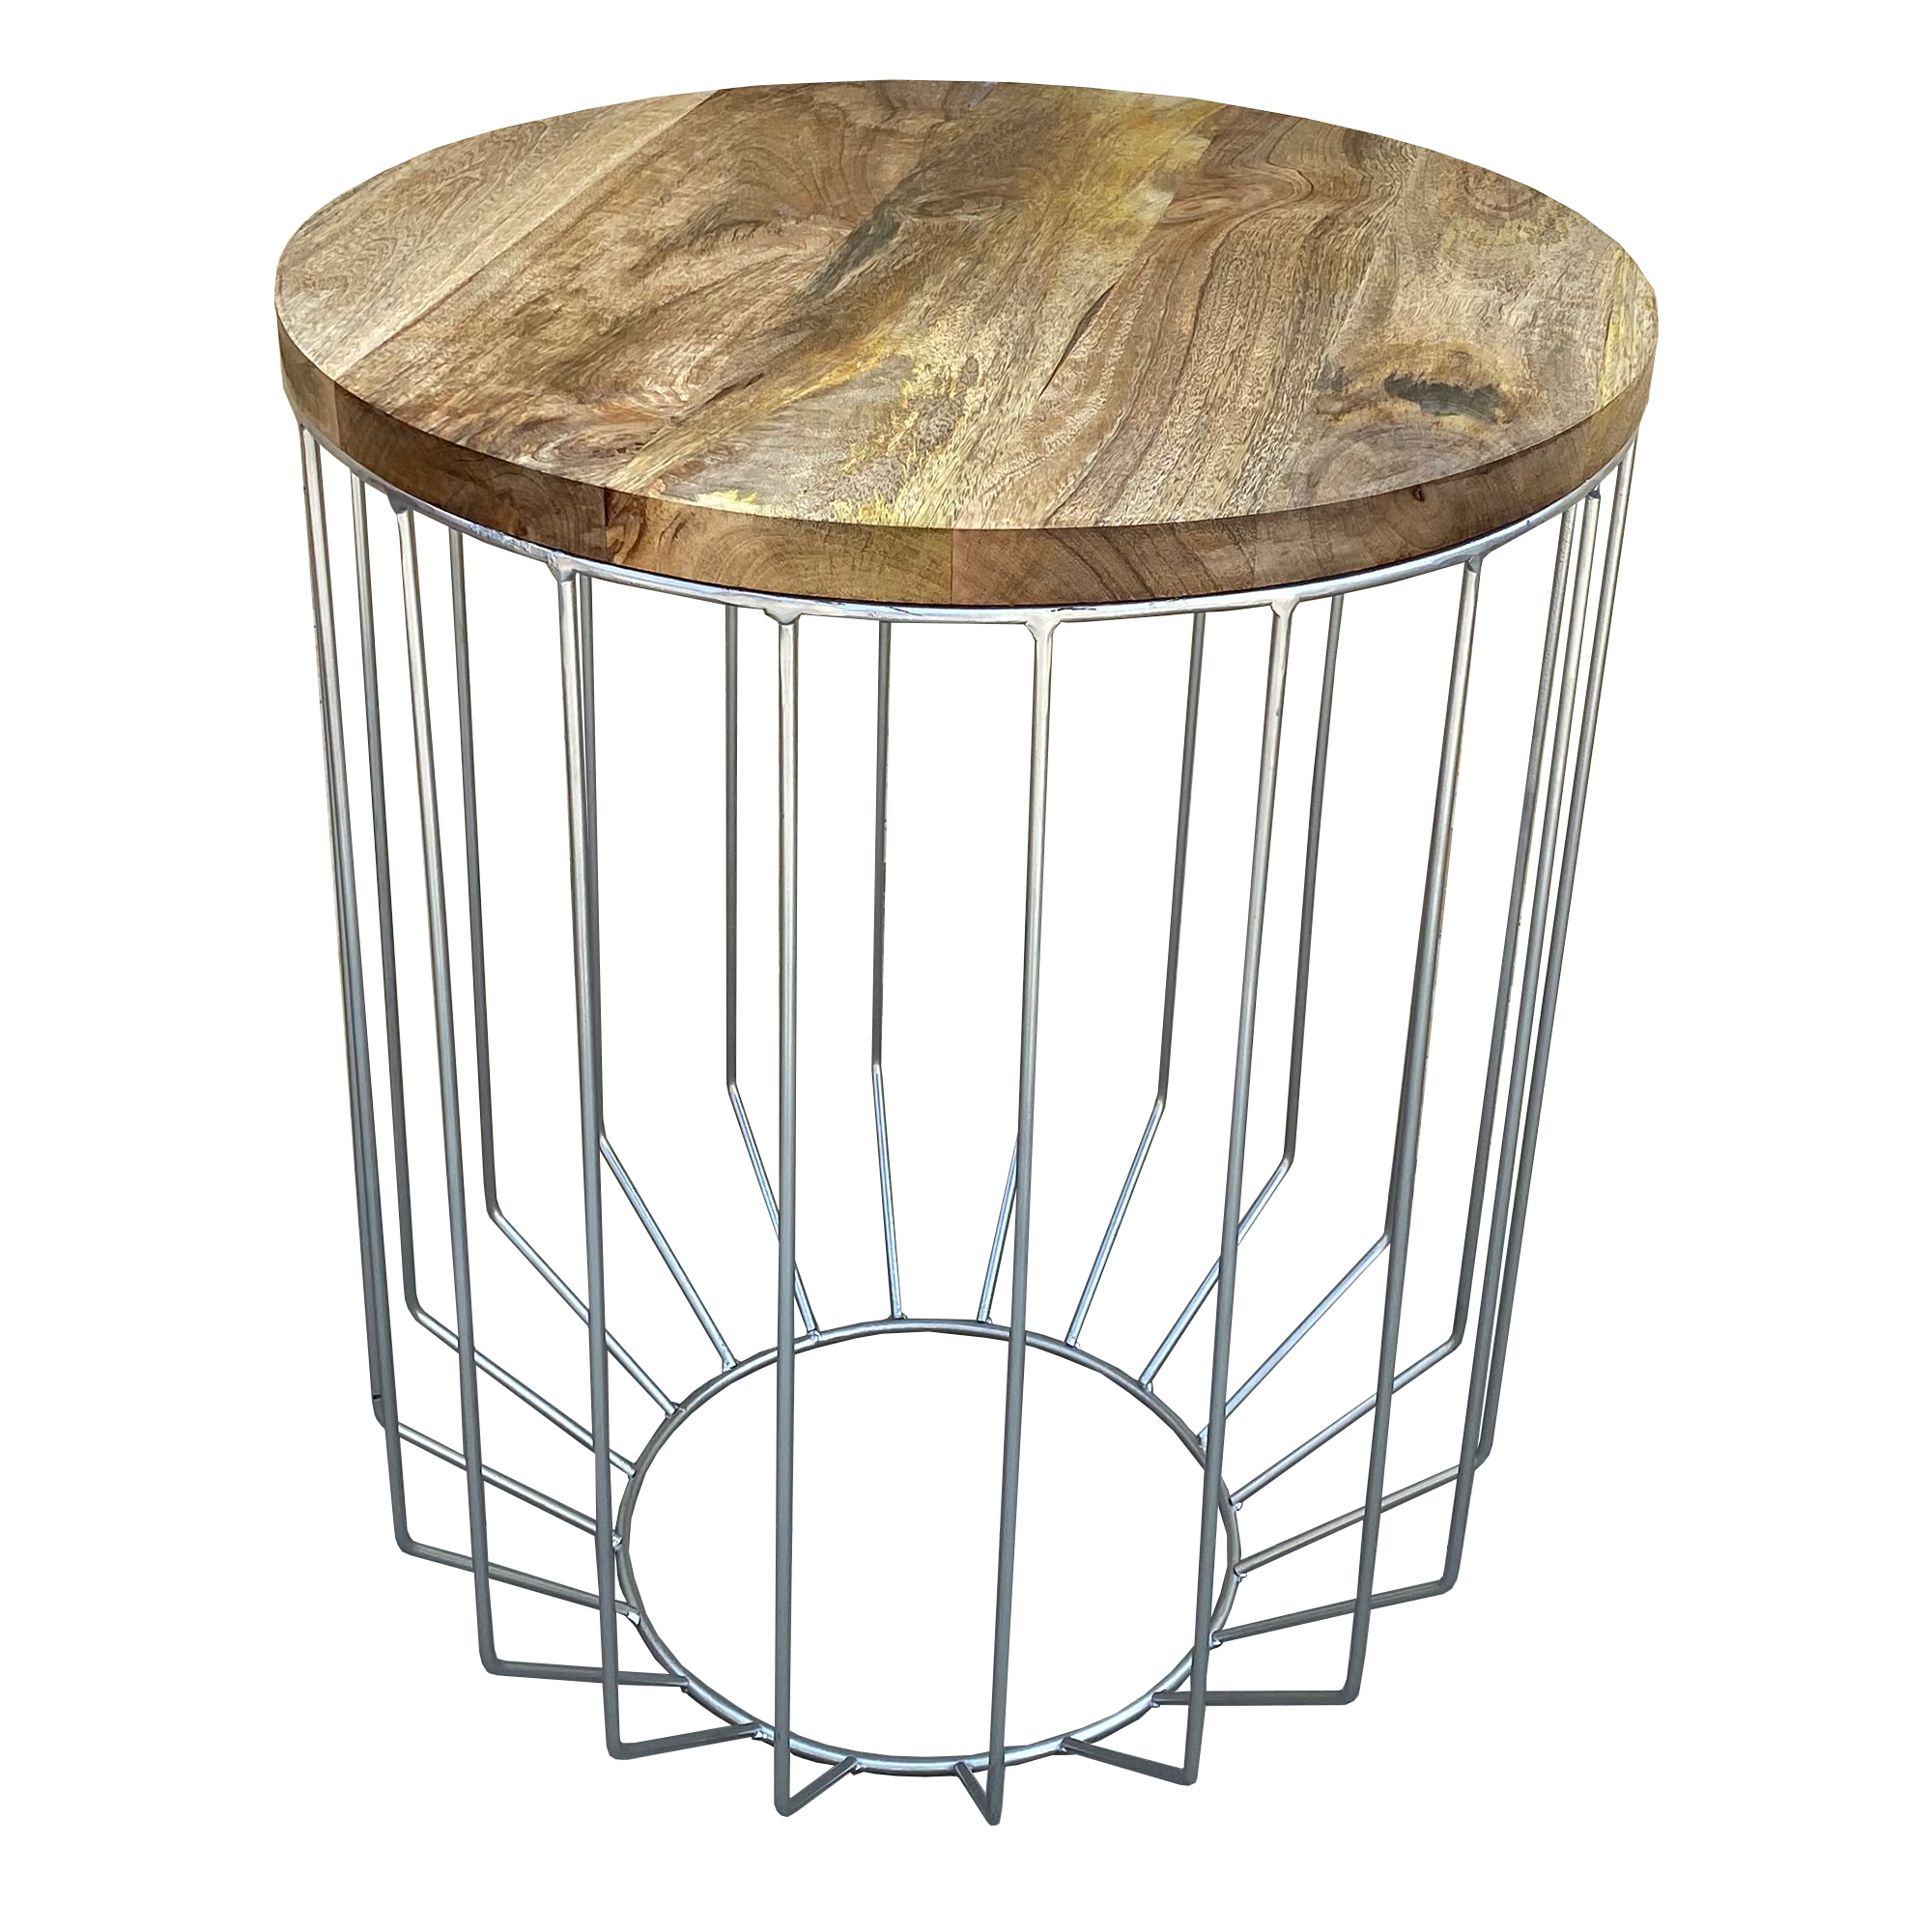 25 Inch Mango Wood Round Side End Accent Table, Tapered Slatted Cage Design, Handcrafted, Natural, Chrome- Saltoro Sherpi